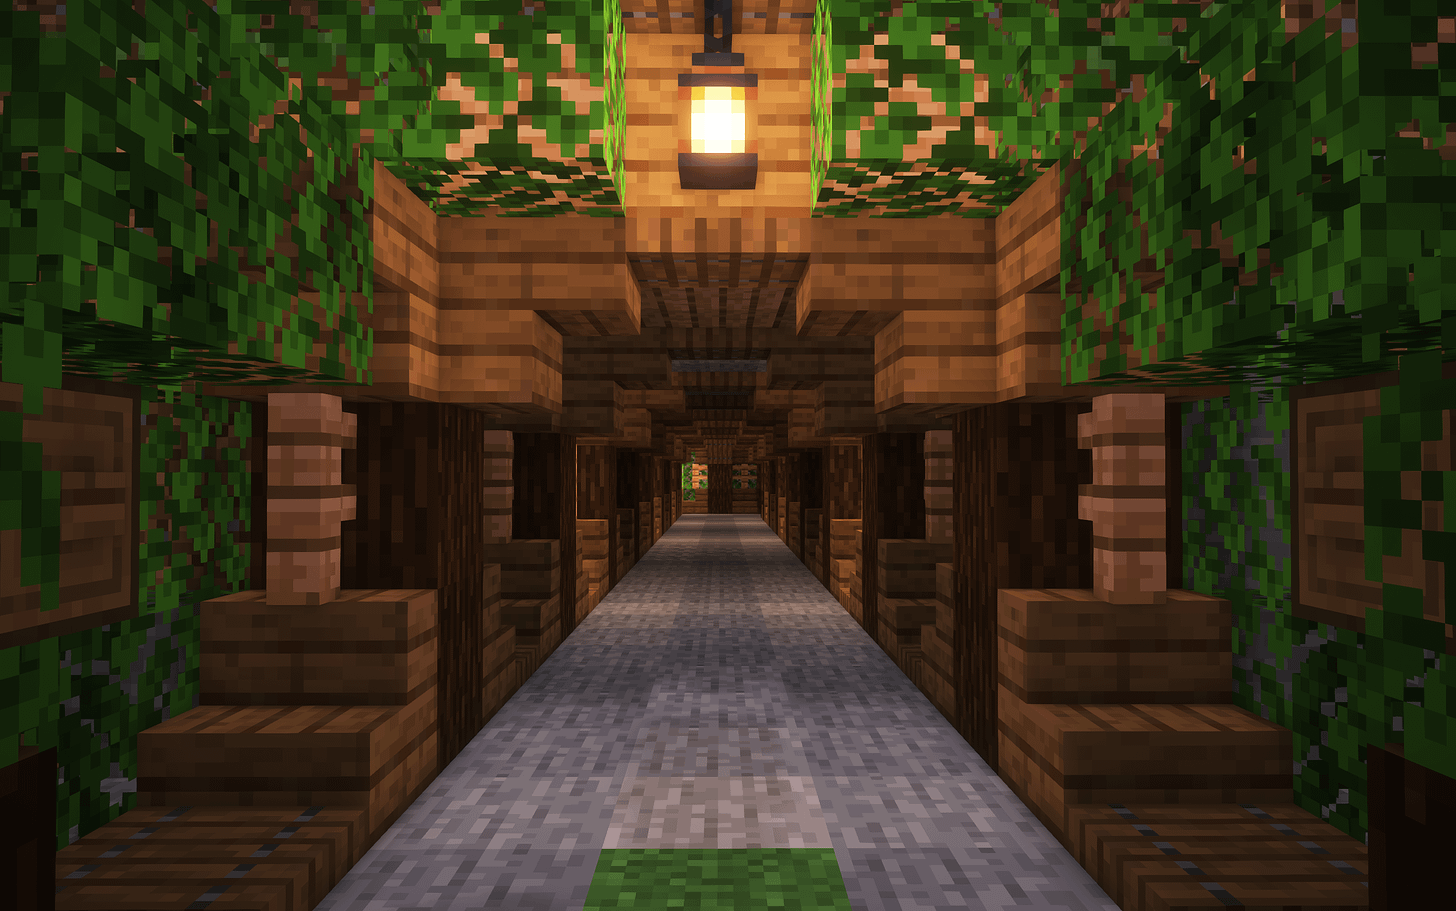 r/Minecraft - Digging pretty tunnels is my go-to pastime when I run out of build ideas on a server :3